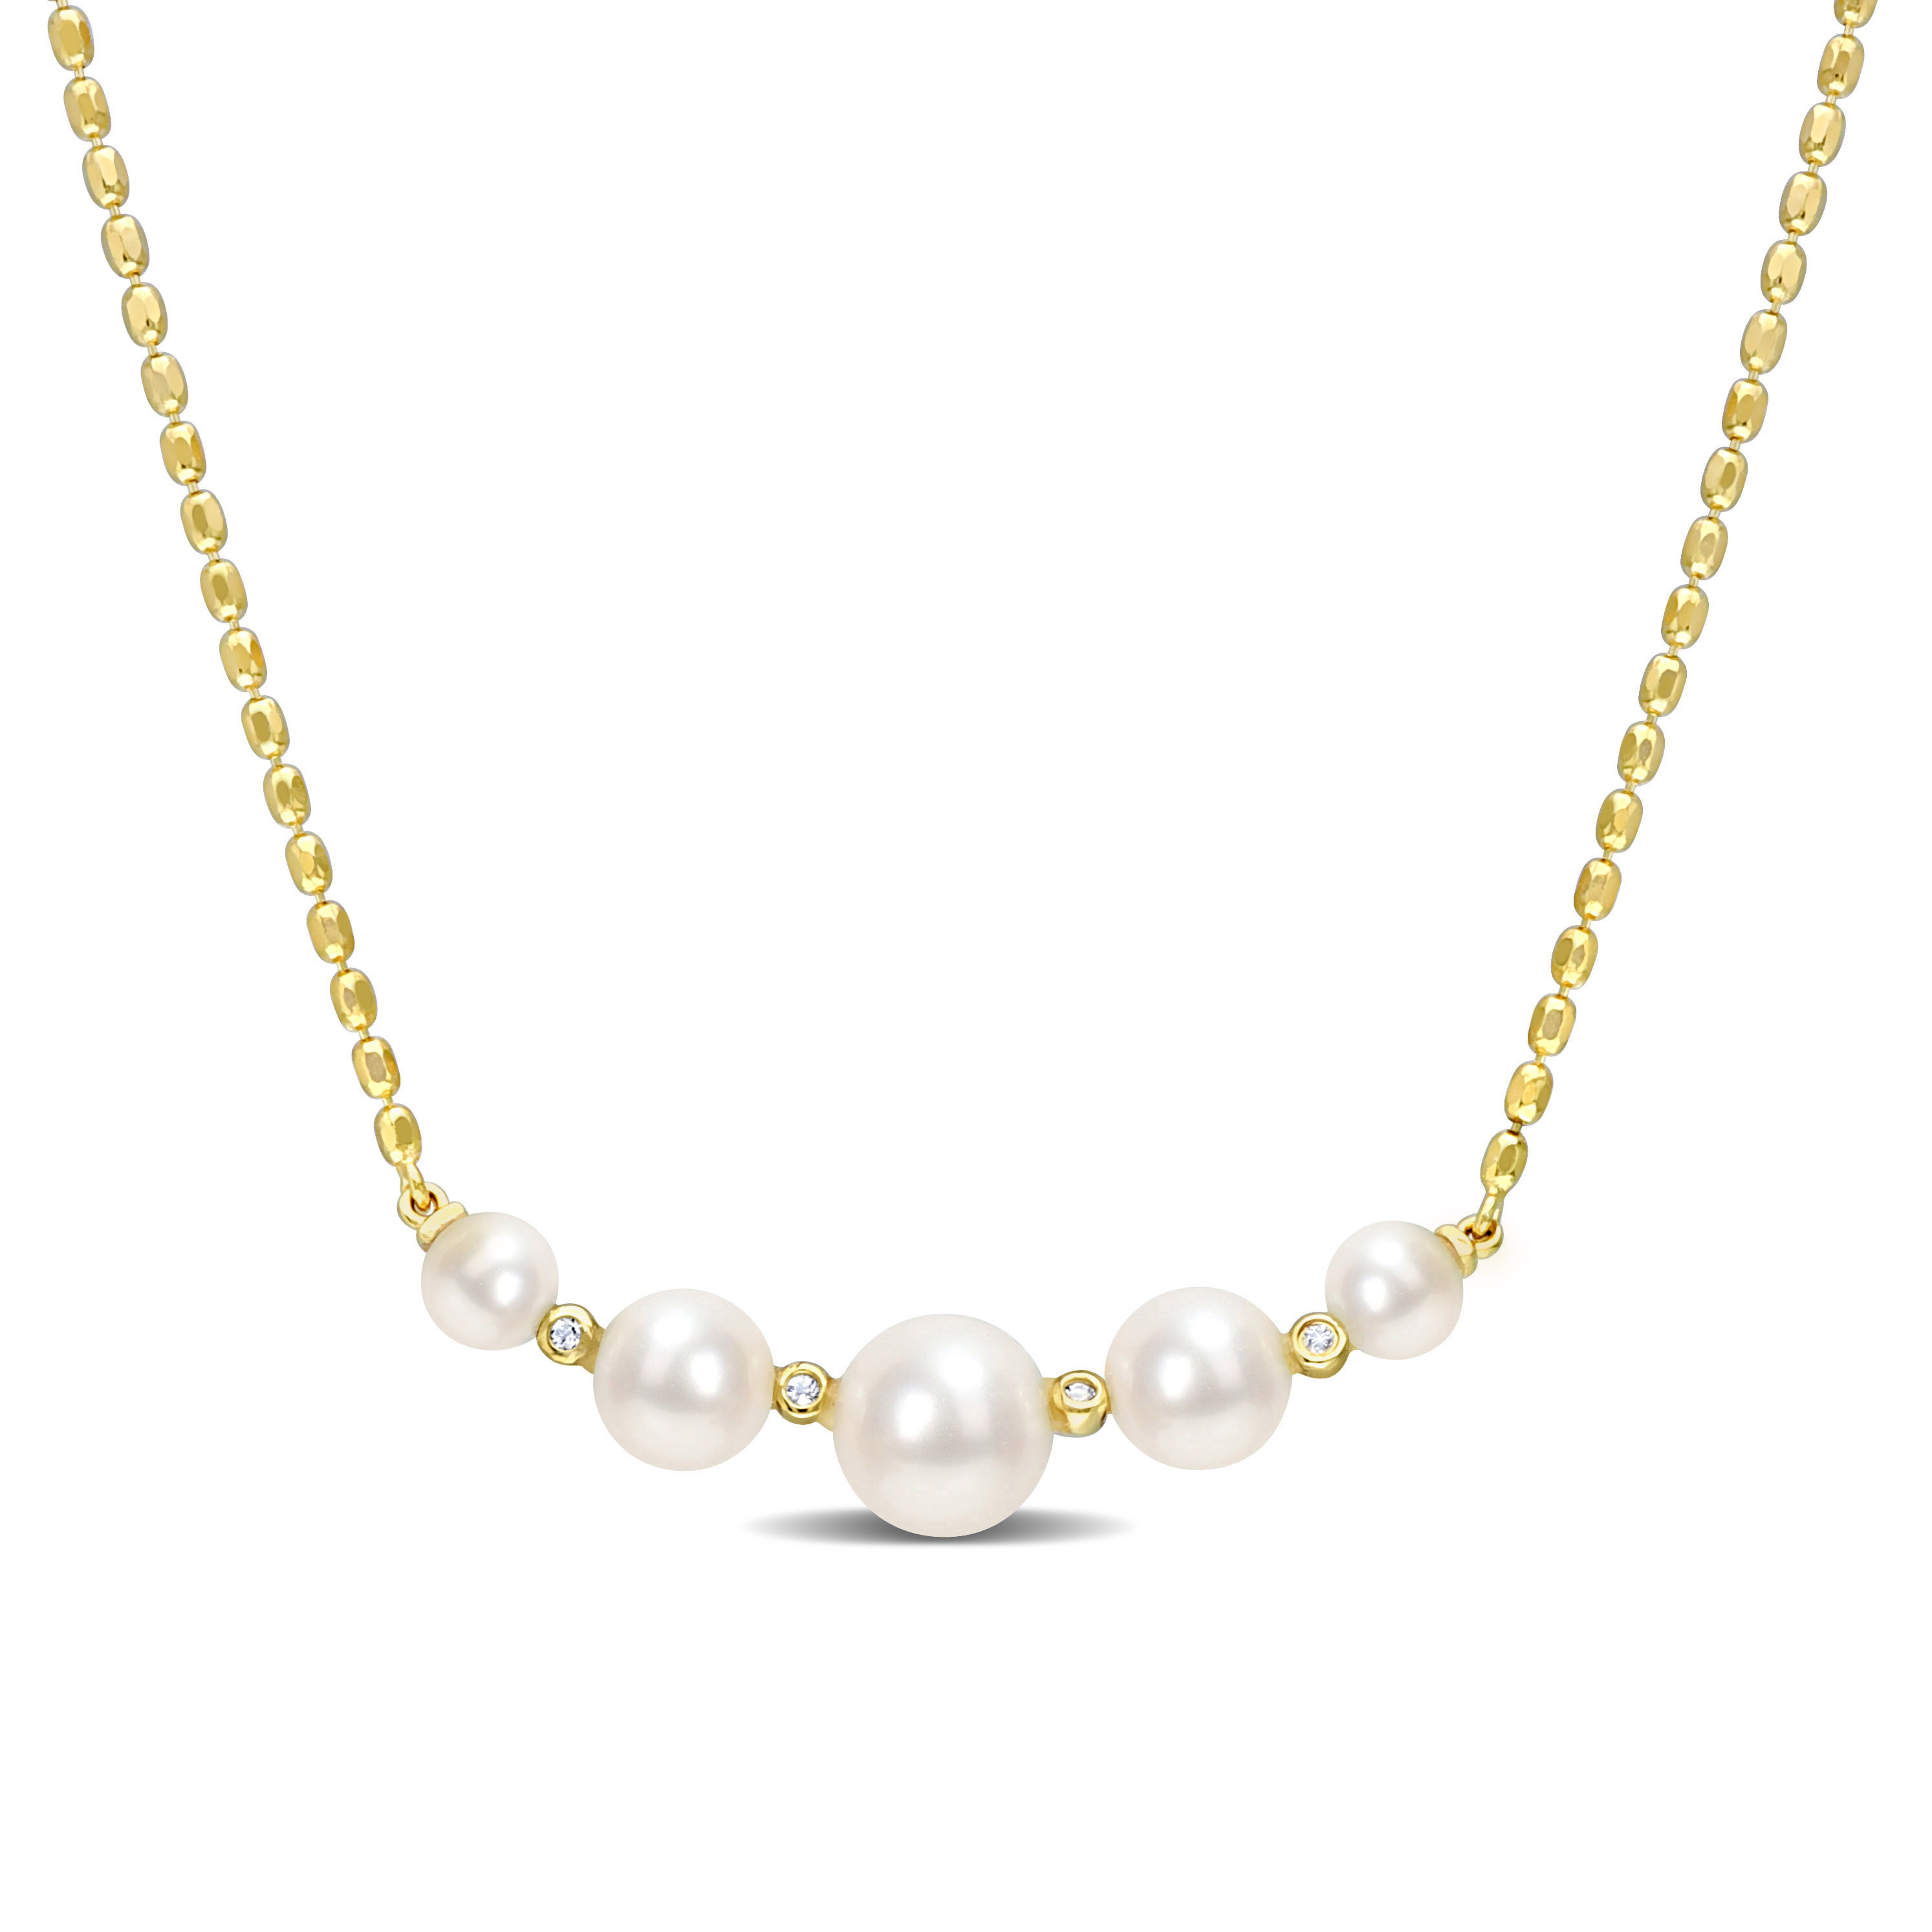 Freshwater Cultured Pearl and White Topaz Necklace in 18k Yellow Gold Plated Sterling Silver - 17 in